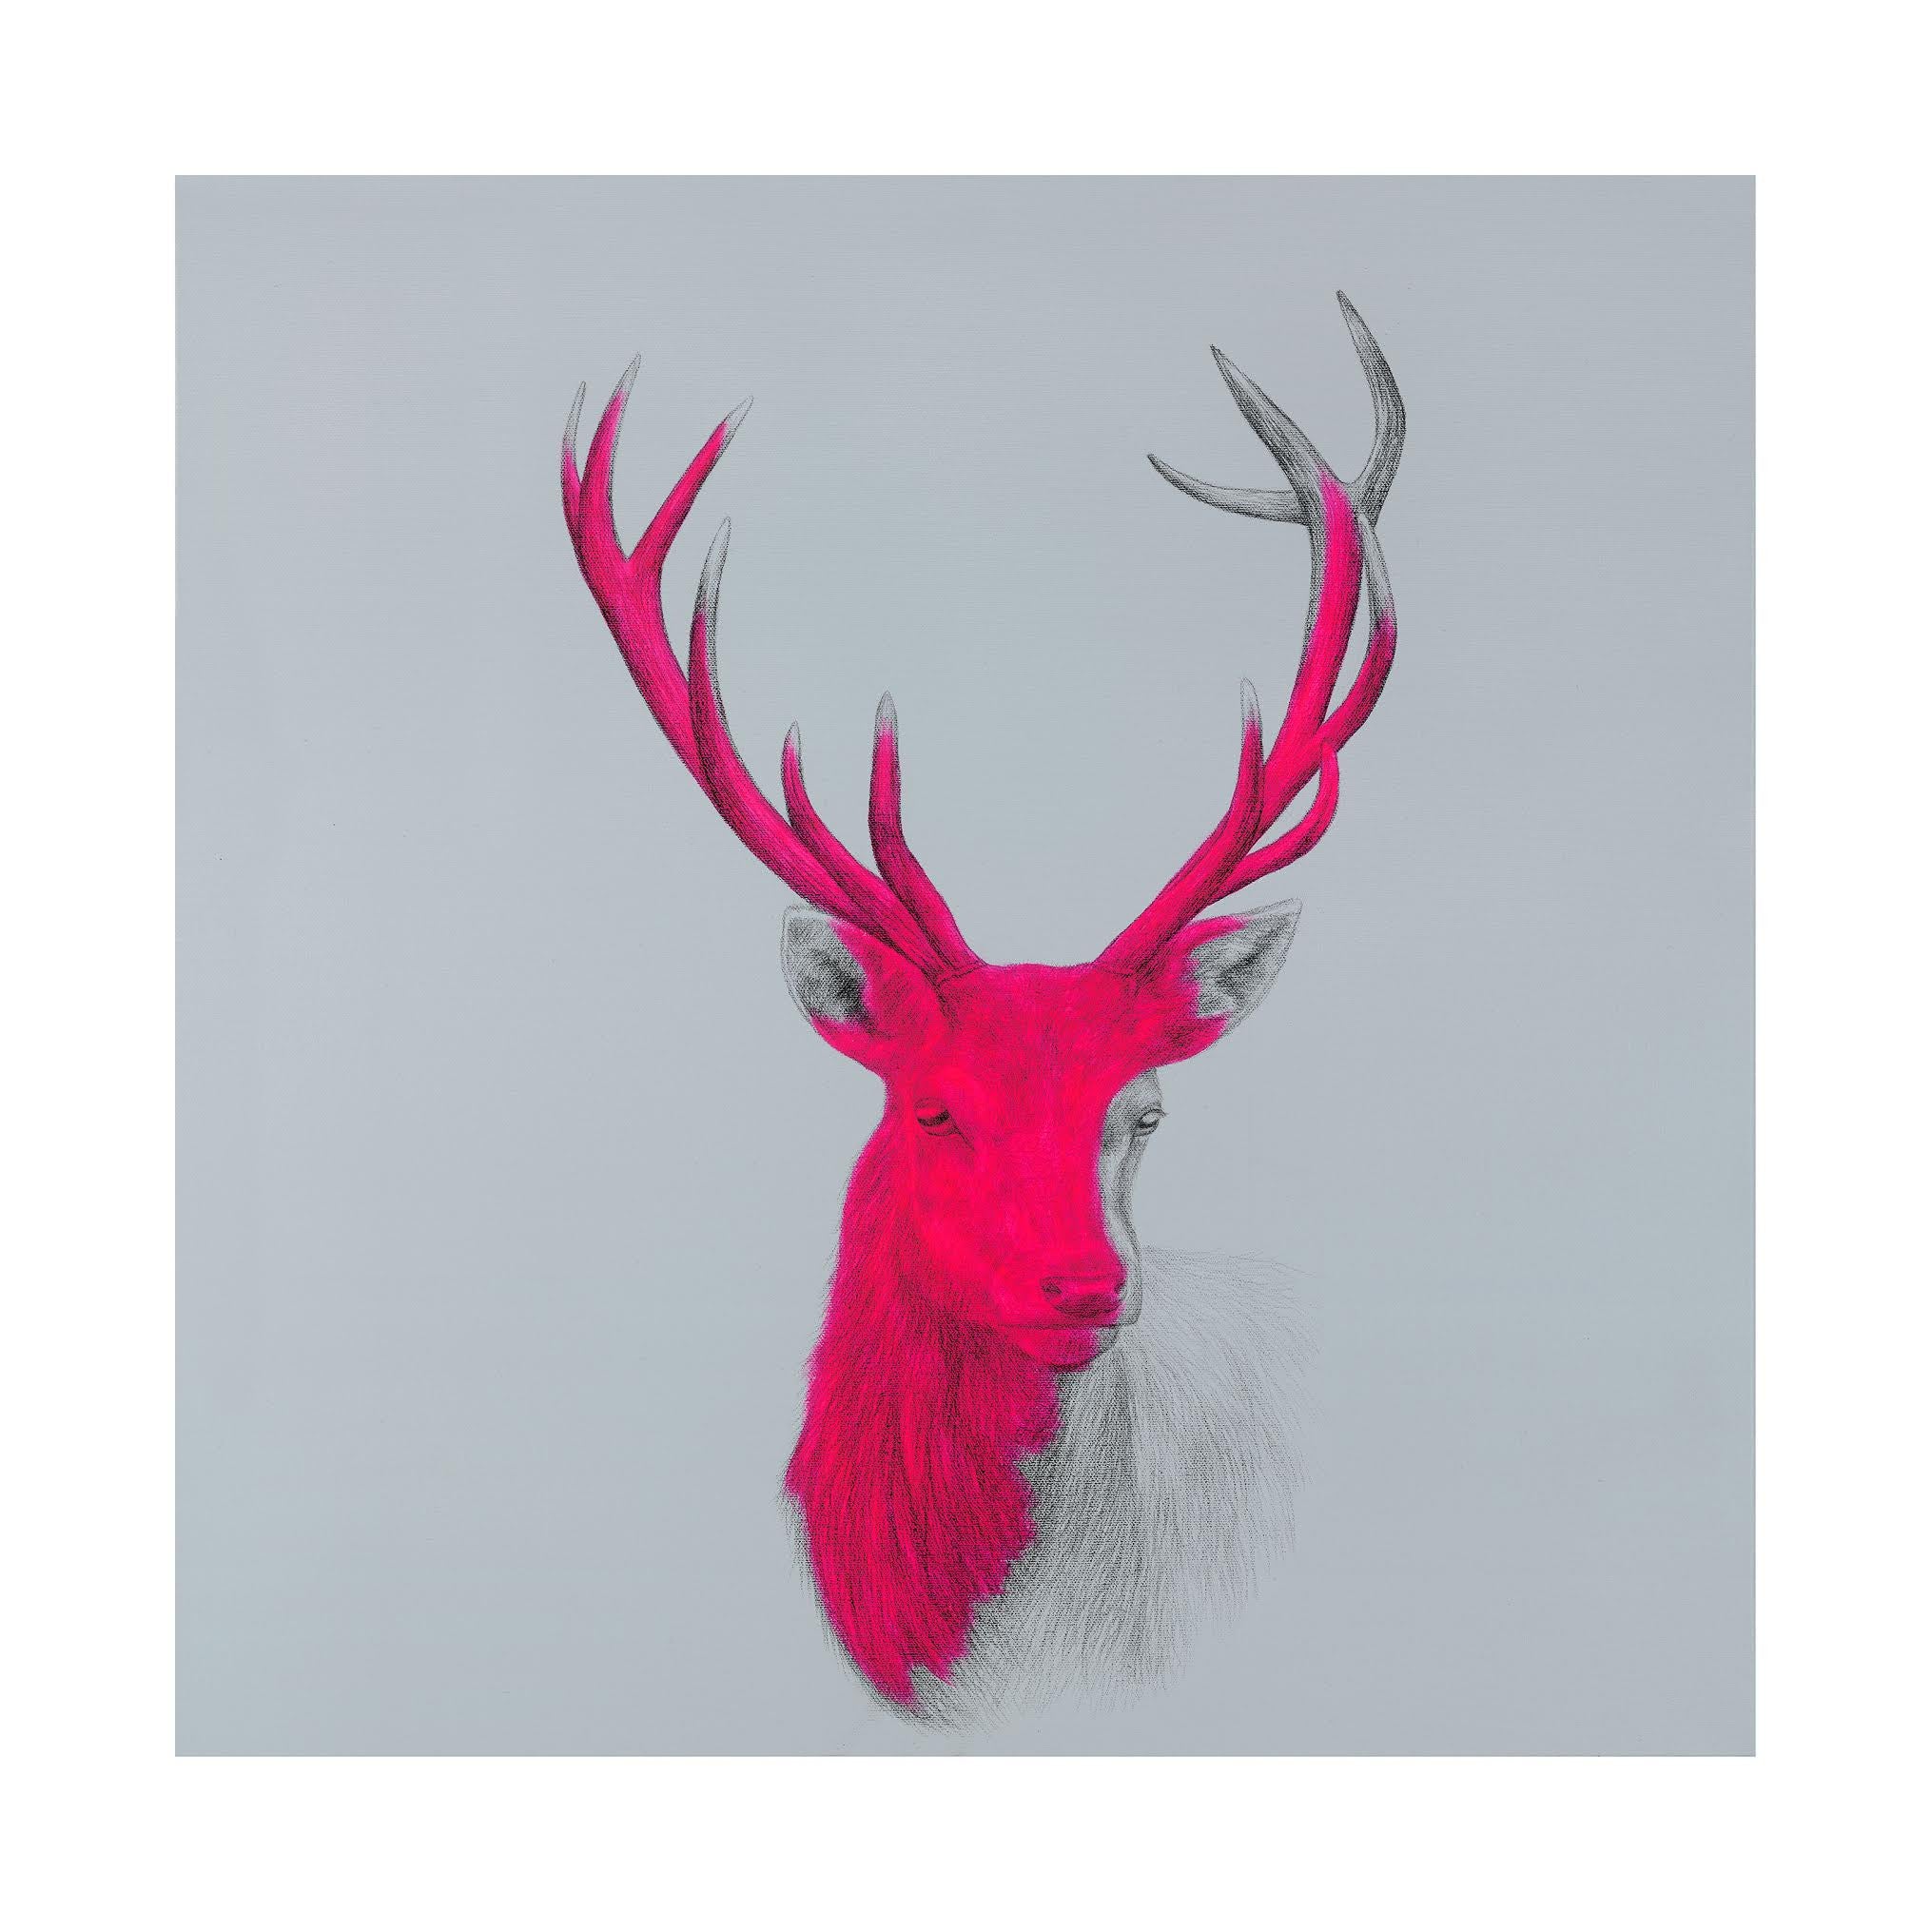 Wildly Sublime - Louise McNaught